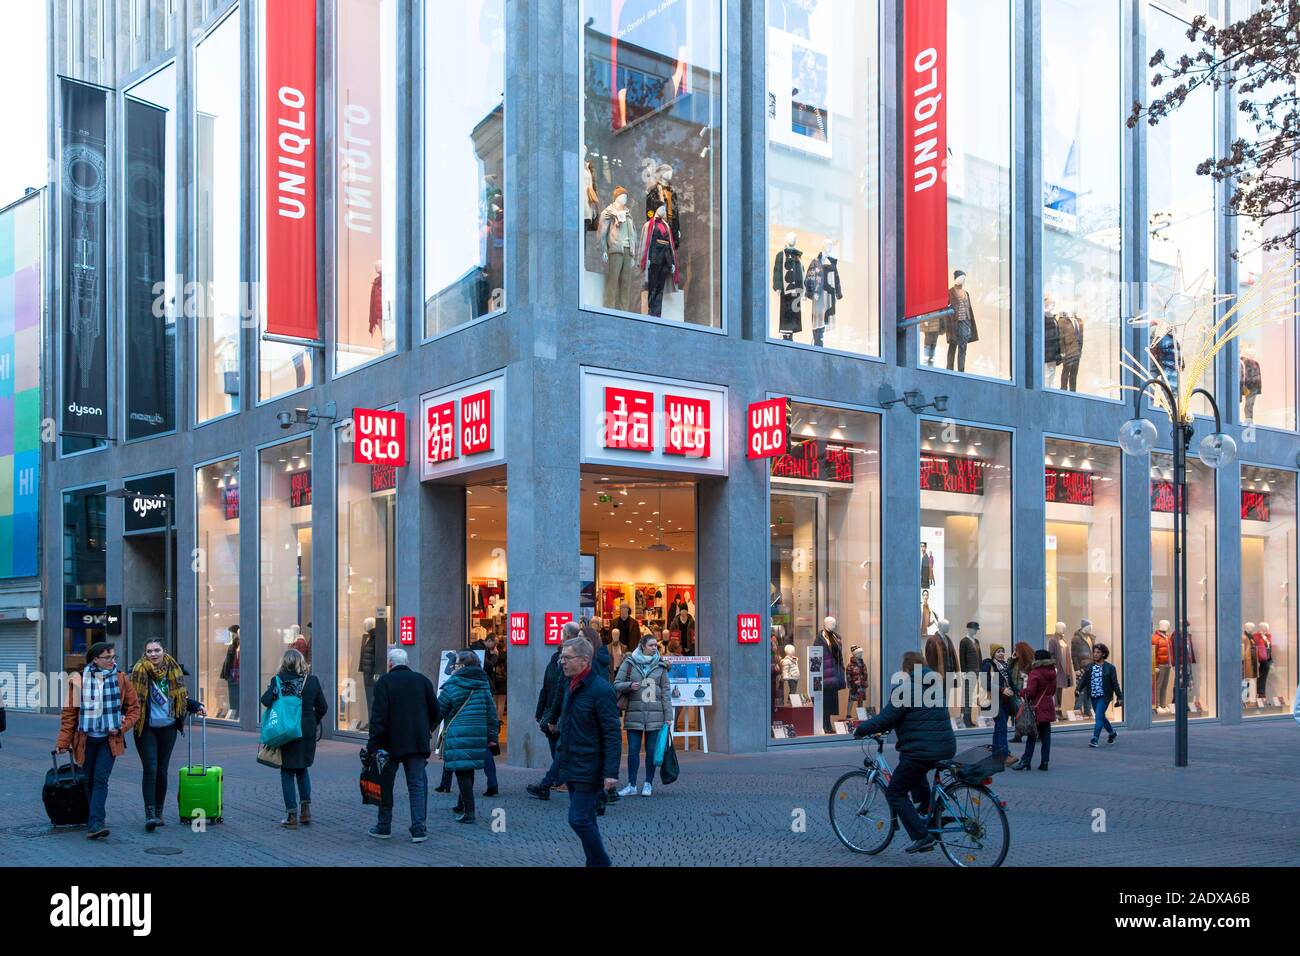 Uniqlo Store High Resolution Stock Photography and Images - Alamy